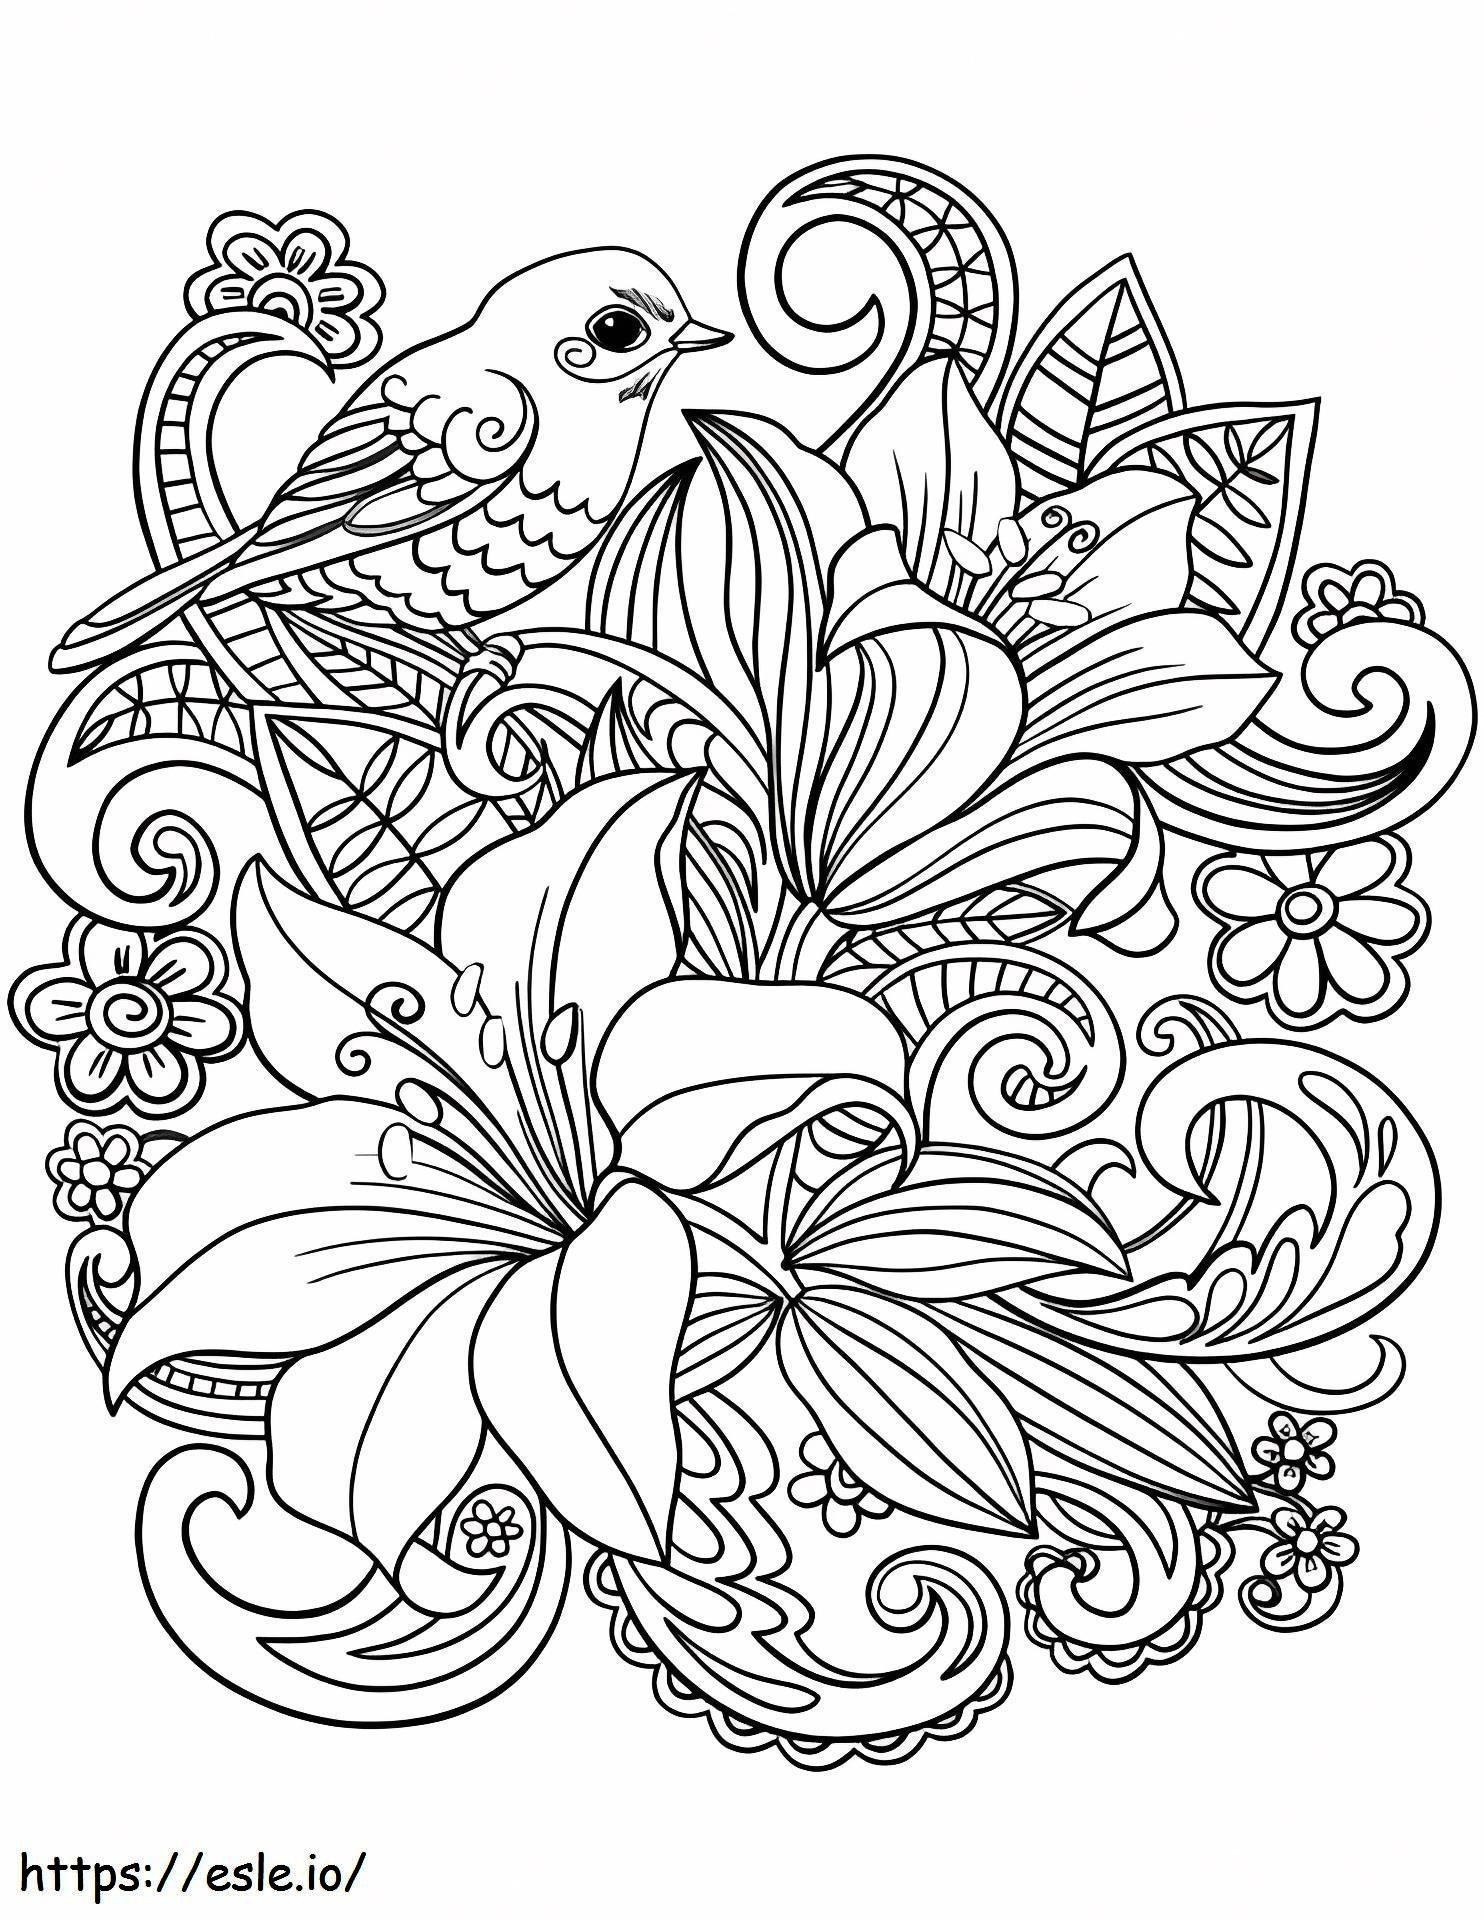 1533003399 Skylark On Flowers A4 coloring page